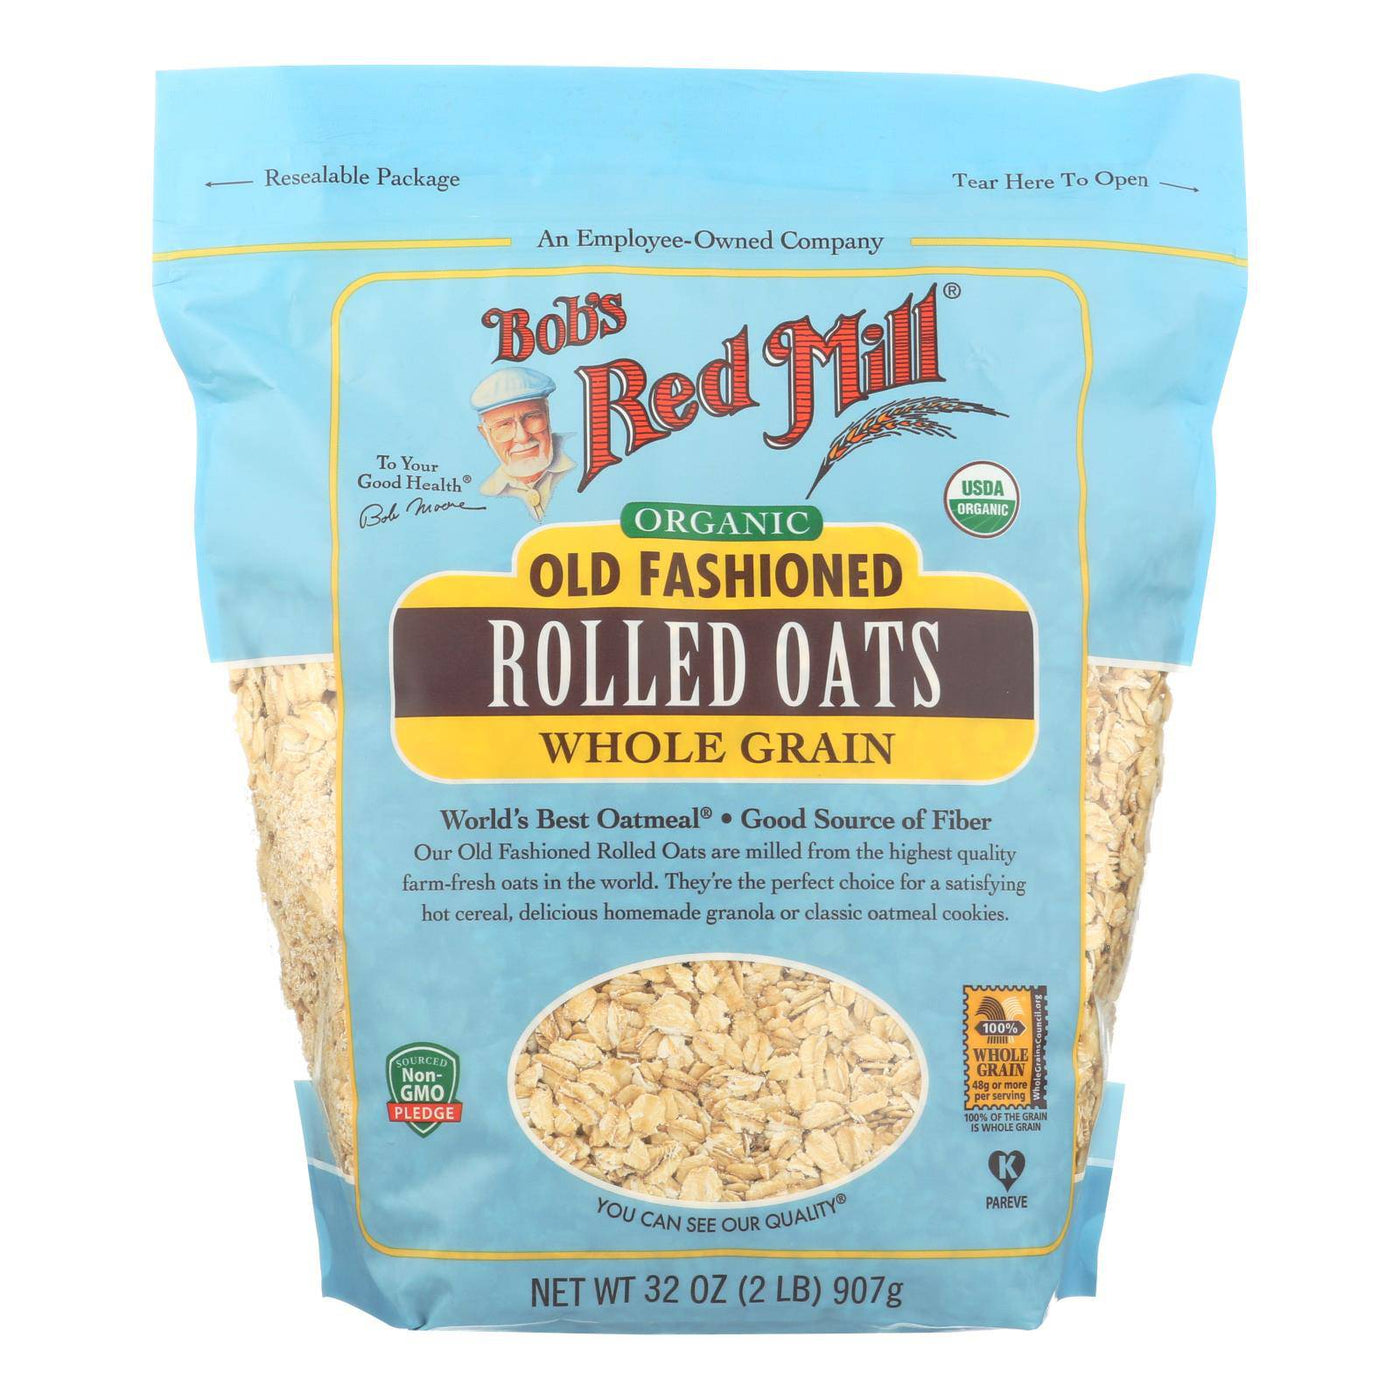 Bob's Red Mill - Oats - Organic Old Fashioned Rolled Oats - Case Of 4 - 32 Oz. | OnlyNaturals.us